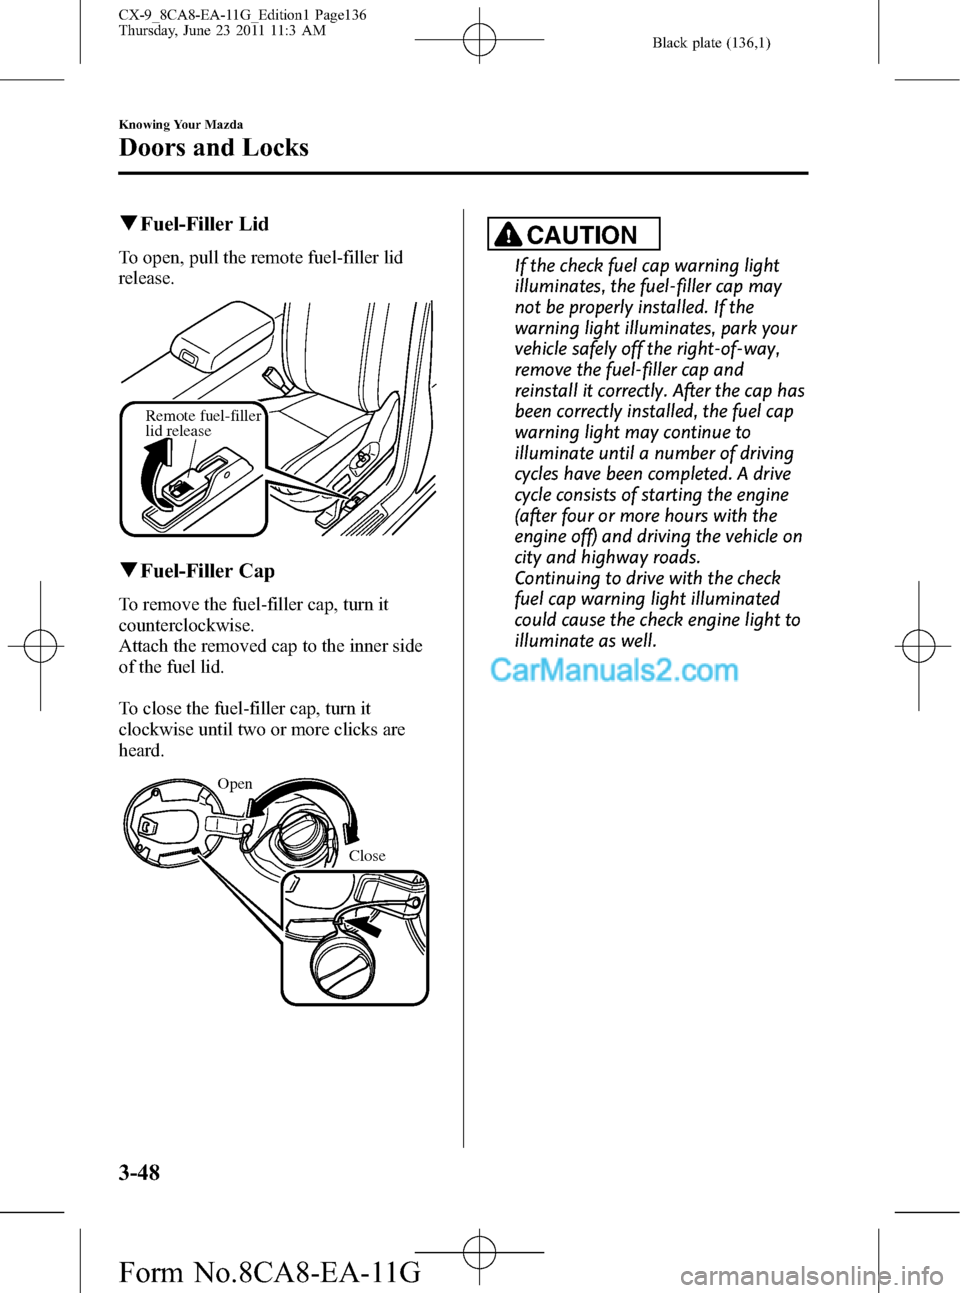 MAZDA MODEL CX-9 2012  Owners Manual (in English) Black plate (136,1)
qFuel-Filler Lid
To open, pull the remote fuel-filler lid
release.
Remote fuel-filler 
lid release
qFuel-Filler Cap
To remove the fuel-filler cap, turn it
counterclockwise.
Attach 